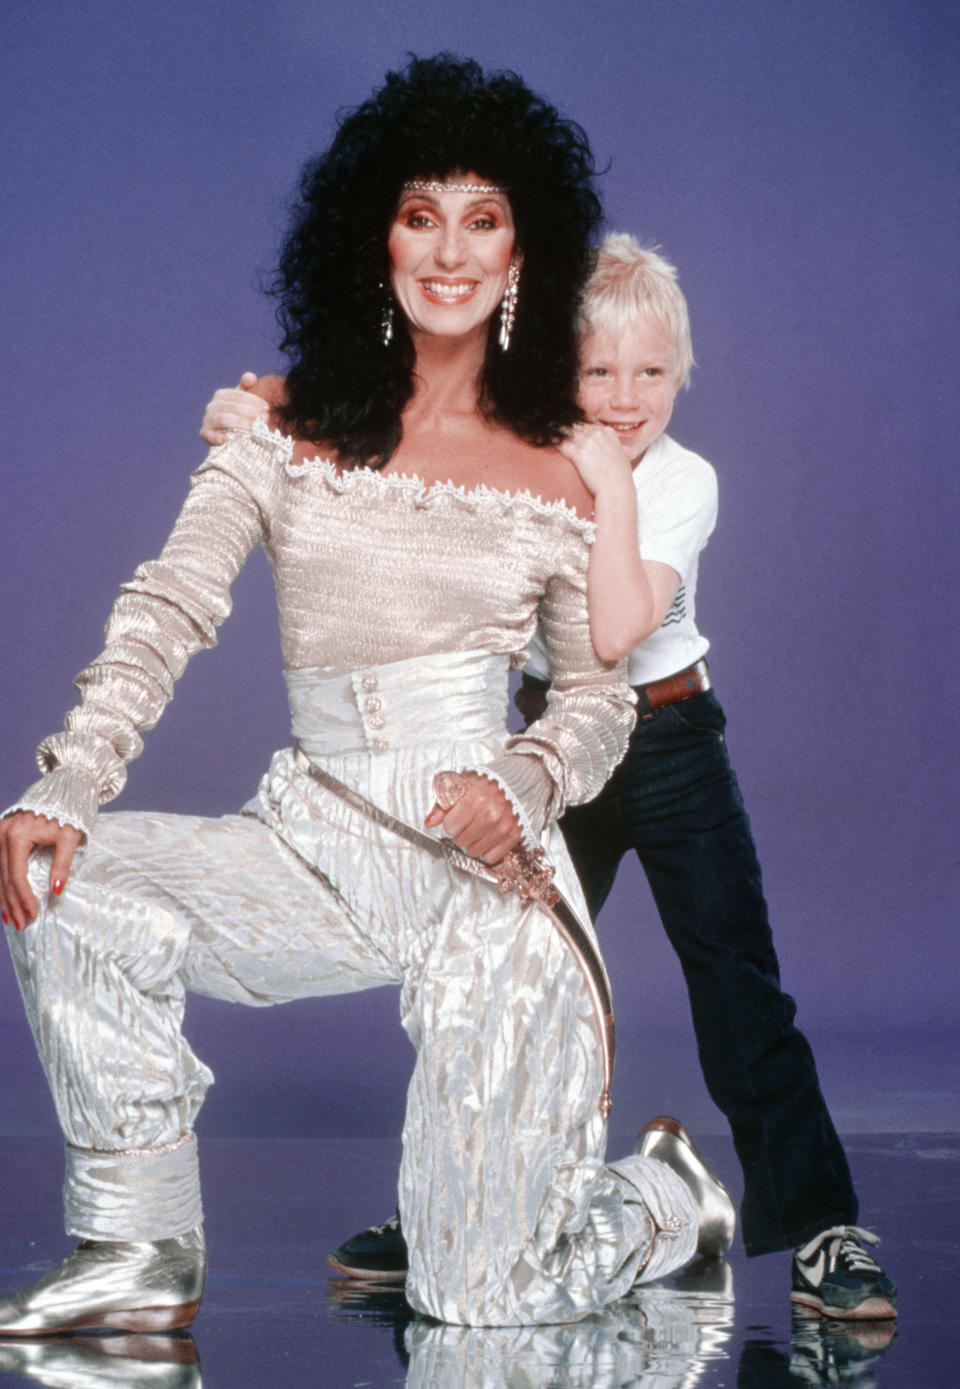 Cher ‘Staged an Extreme Intervention’ for Son Elijah Amid Addiction Struggles